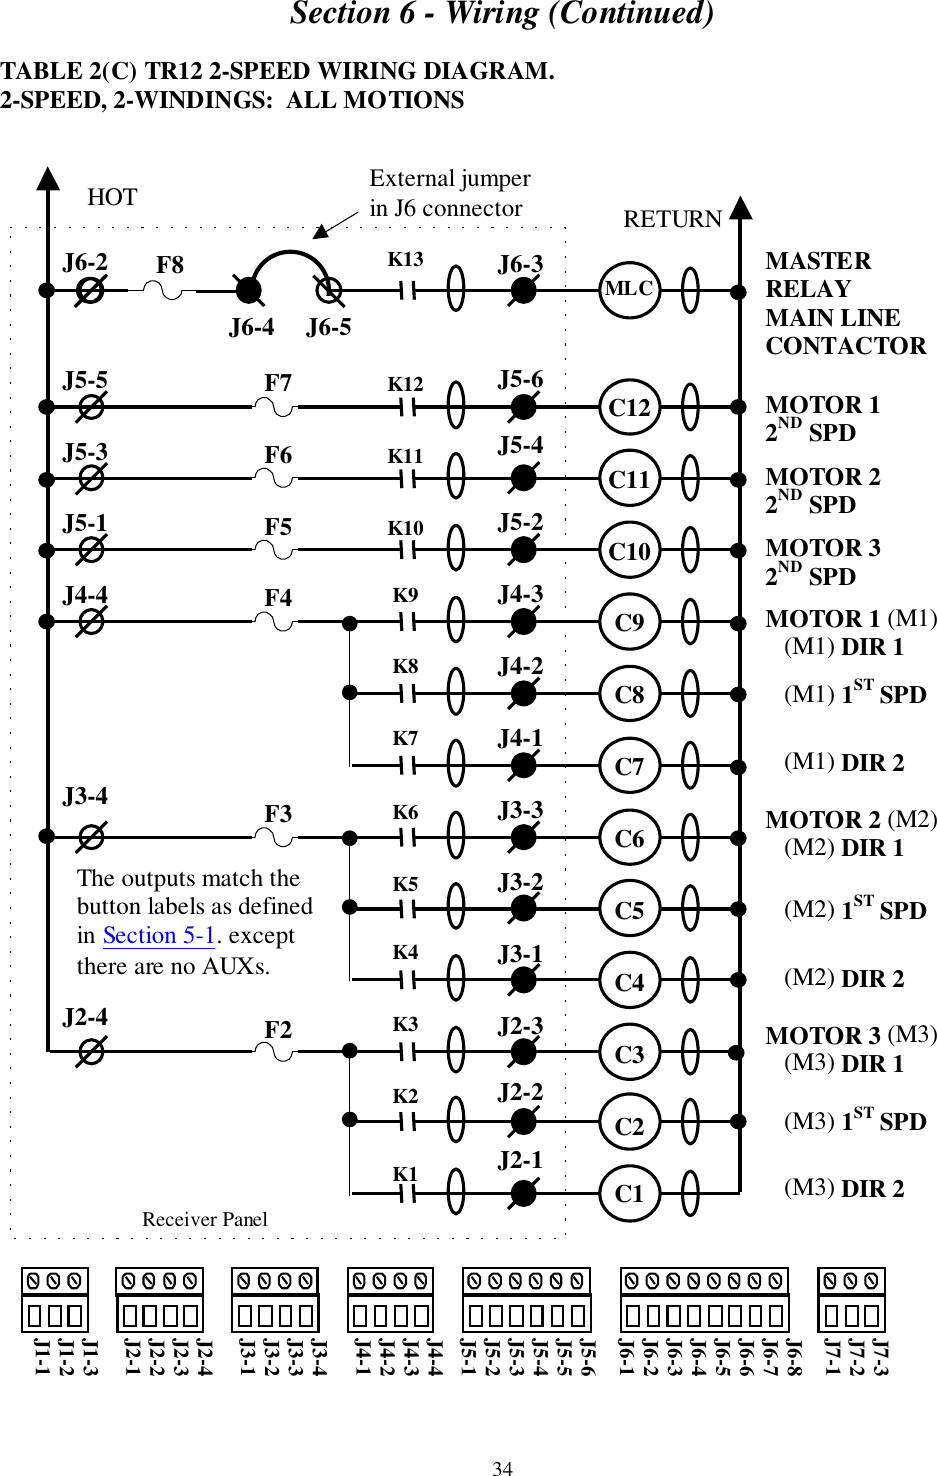 Section 6 - Wiring (Continued)34TABLE 2(C) TR12 2-SPEED WIRING DIAGRAM.2-SPEED, 2-WINDINGS:  ALL MOTIONSMASTERRELAYMAIN LINECONTACTORMOTOR 12ND SPDMOTOR 22ND SPDMOTOR 32ND SPDMOTOR 1 (M1)   (M1) DIR 1   (M1) 1ST SPD   (M1) DIR 2MOTOR 2 (M2)   (M2) DIR 1   (M2) 1ST SPD   (M2) DIR 2MOTOR 3 (M3)   (M3) DIR 1   (M3) 1ST SPD   (M3) DIR 2     Receiver PanelJ6-2J5-5J5-3J5-1J4-4J3-4J2-4J6-3J5-6J5-4J5-2J4-3J4-2J4-1J3-3J3-2J3-1J2-3J2-2J2-1HOT RETURNK13K12K11K10K9K8K7K6K5K4K3K2K1MLCC12C11C10C9C8C7C6C5C4C3C2C1F7F6F5F4F3F2J7-3J7-2J7-1J6-8J6-7J6-6J6-5J6-4J6-3J6-2J6-1J5-6J5-5J5-4J5-3J5-2J5-1J4-4J4-3J4-2J4-1J3-4J3-3J3-2J3-1J2-4J2-3J2-2J2-1J1-3J1-2J1-1External jumperin J6 connectorJ6-4     J6-5F8The outputs match thebutton labels as definedin Section 5-1. exceptthere are no AUXs.